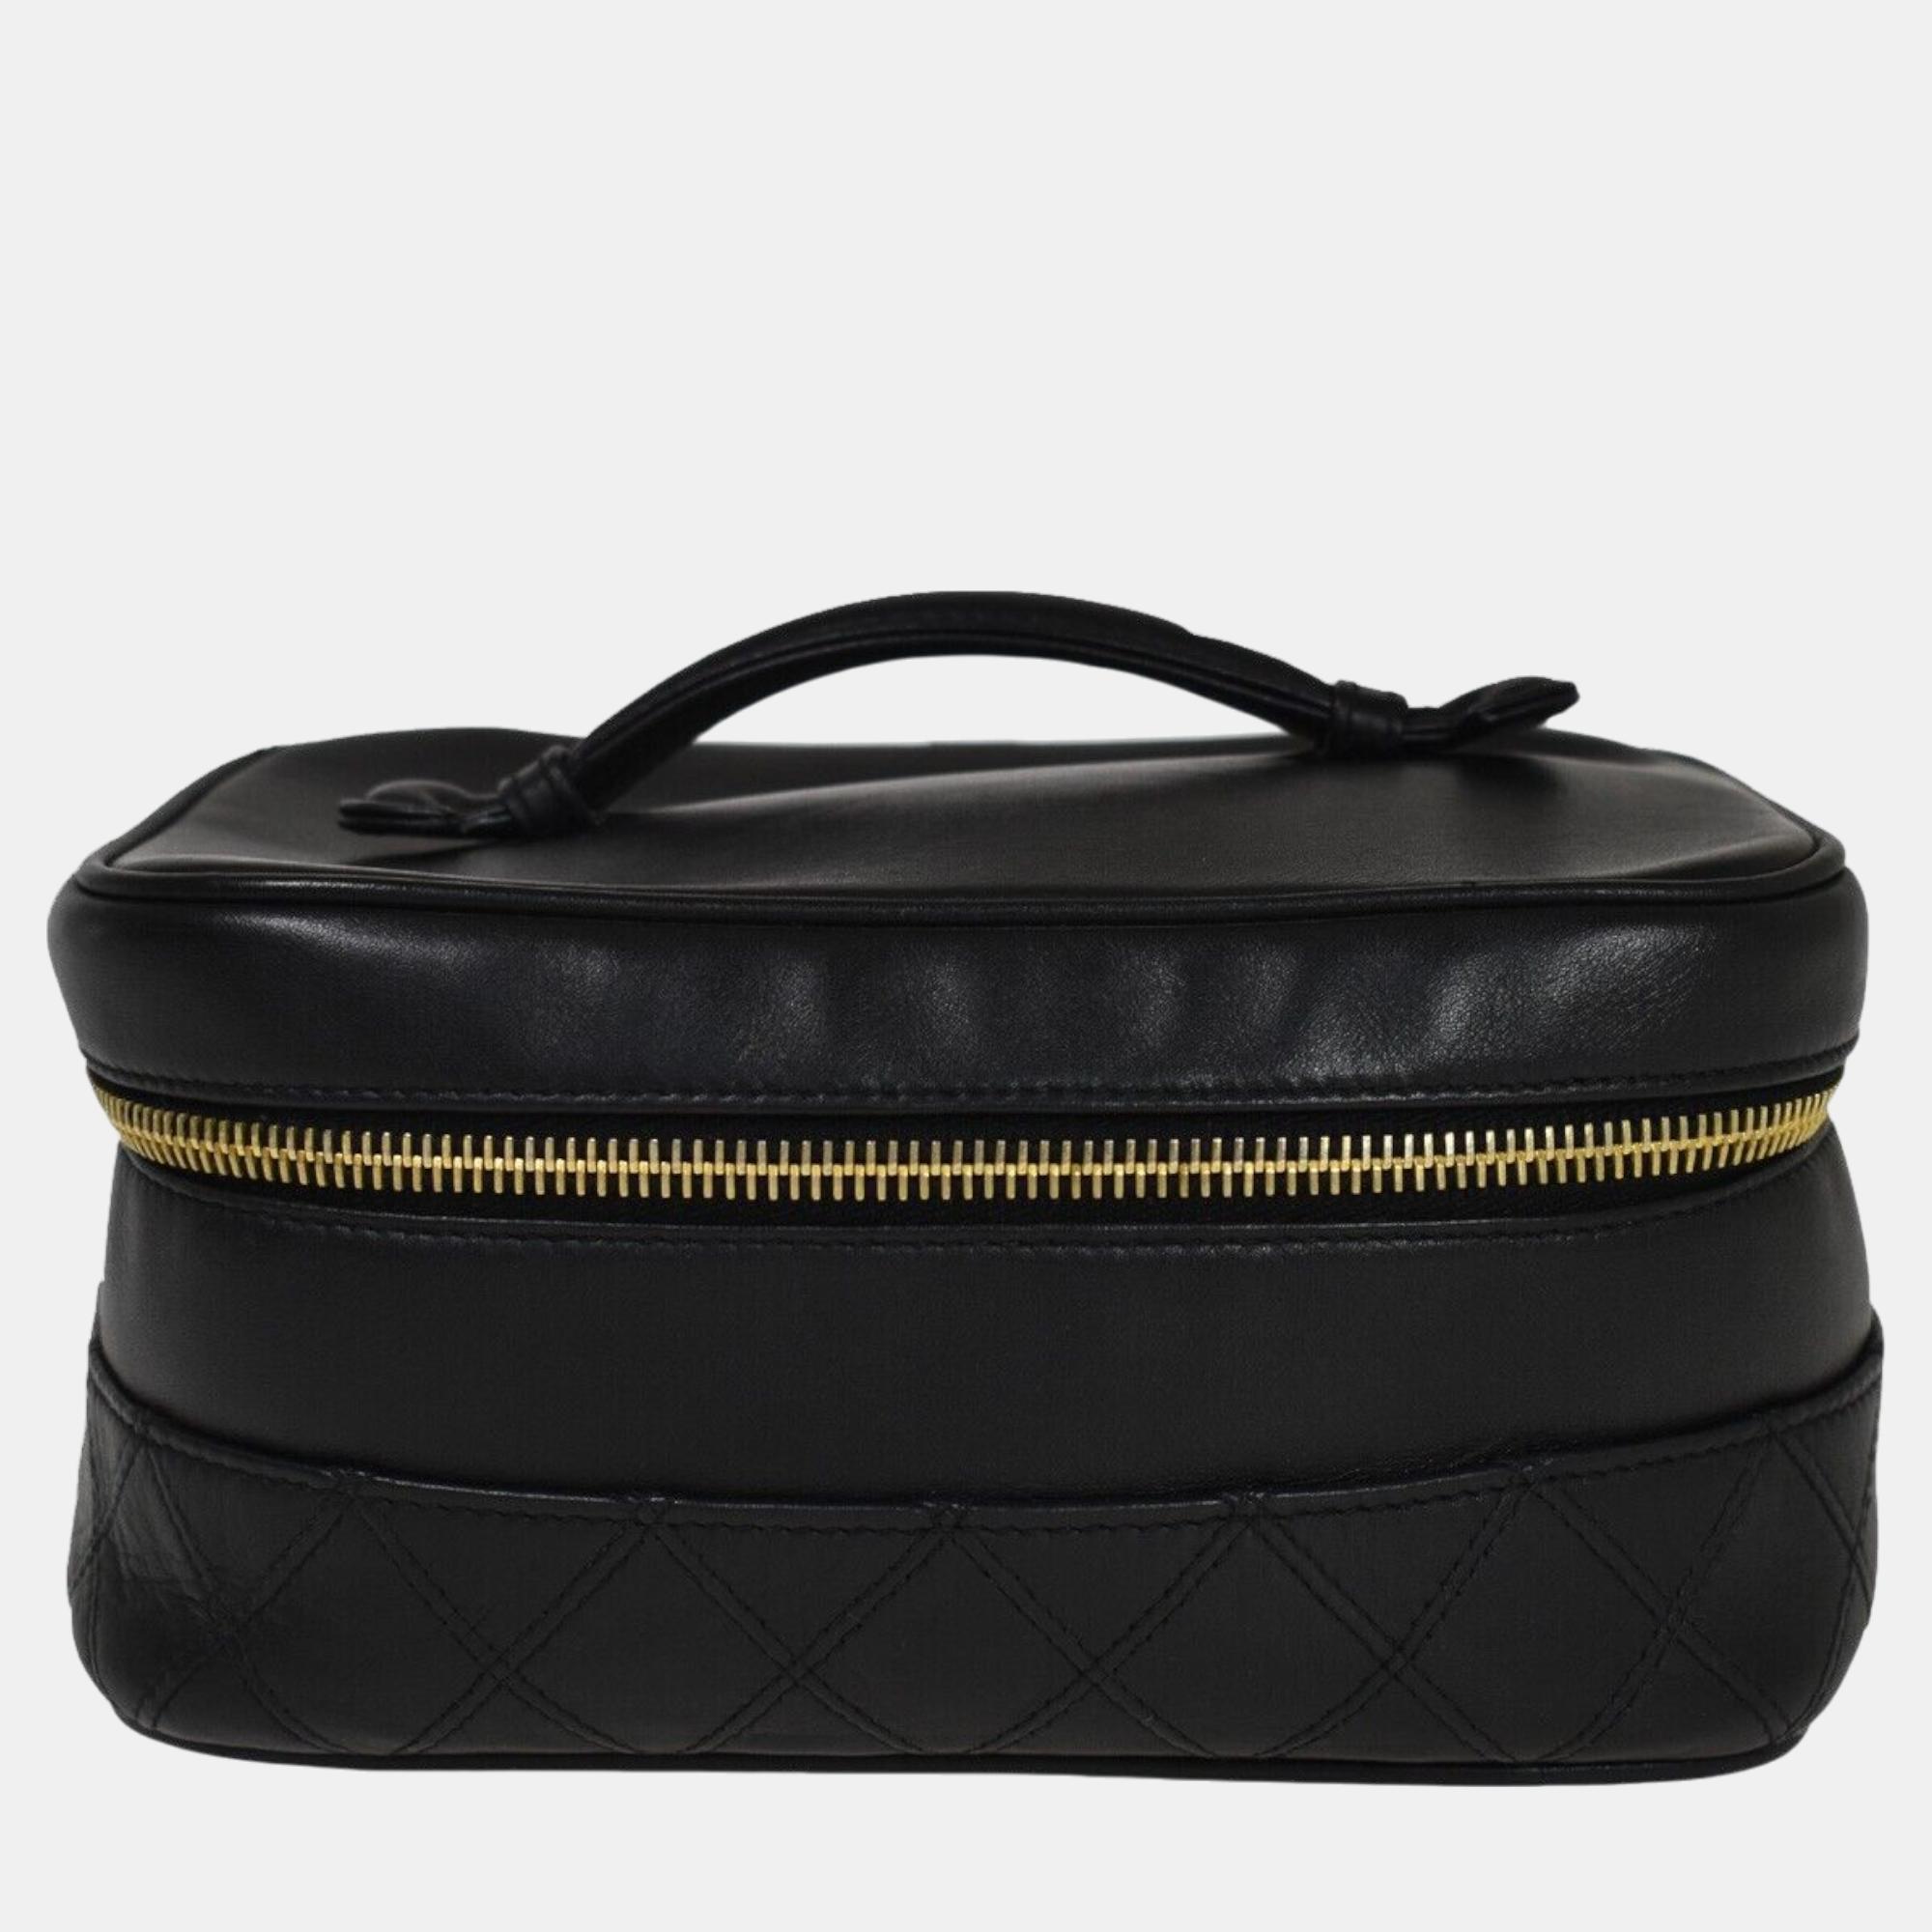 Chanel black leather cosmetic bag